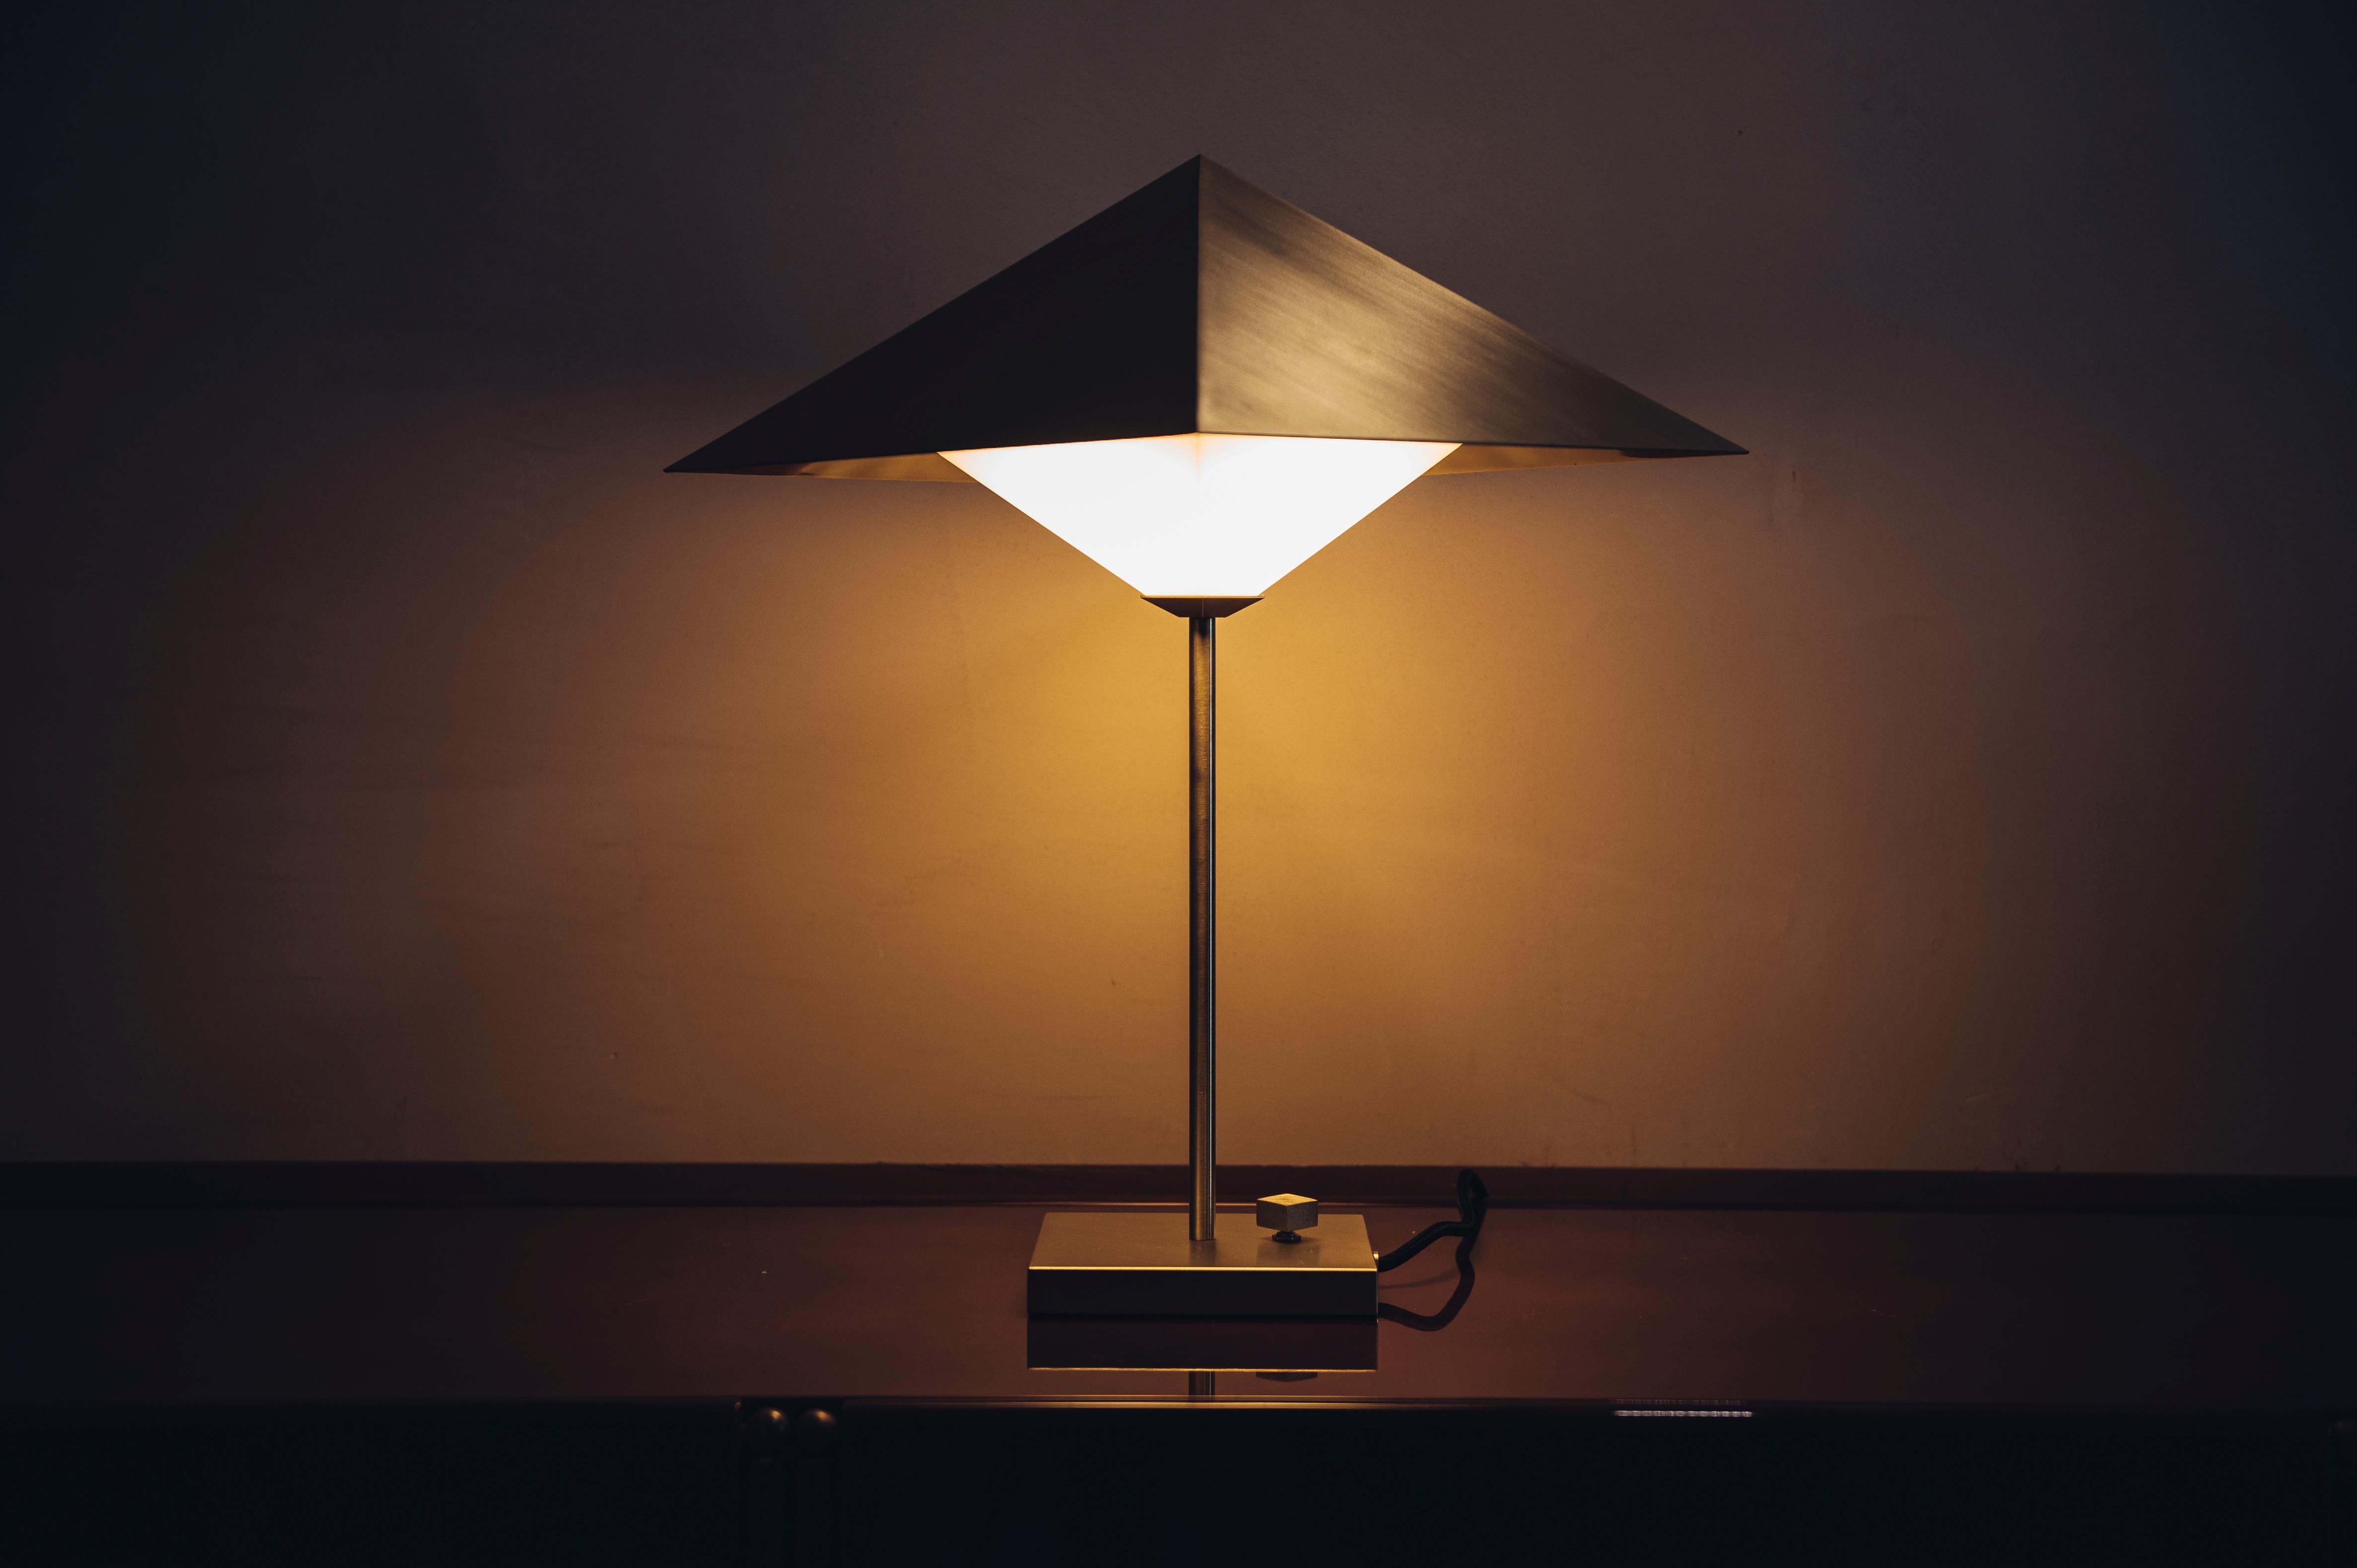 Octa table by Diaphan Studio

The dominant feature of OCTA’s table lamp is its square pyramidal shade. The acute angles of the pyramid are emphasized by the brushing direction, which remains consistent in the base and rotary switch. The pyramid’s